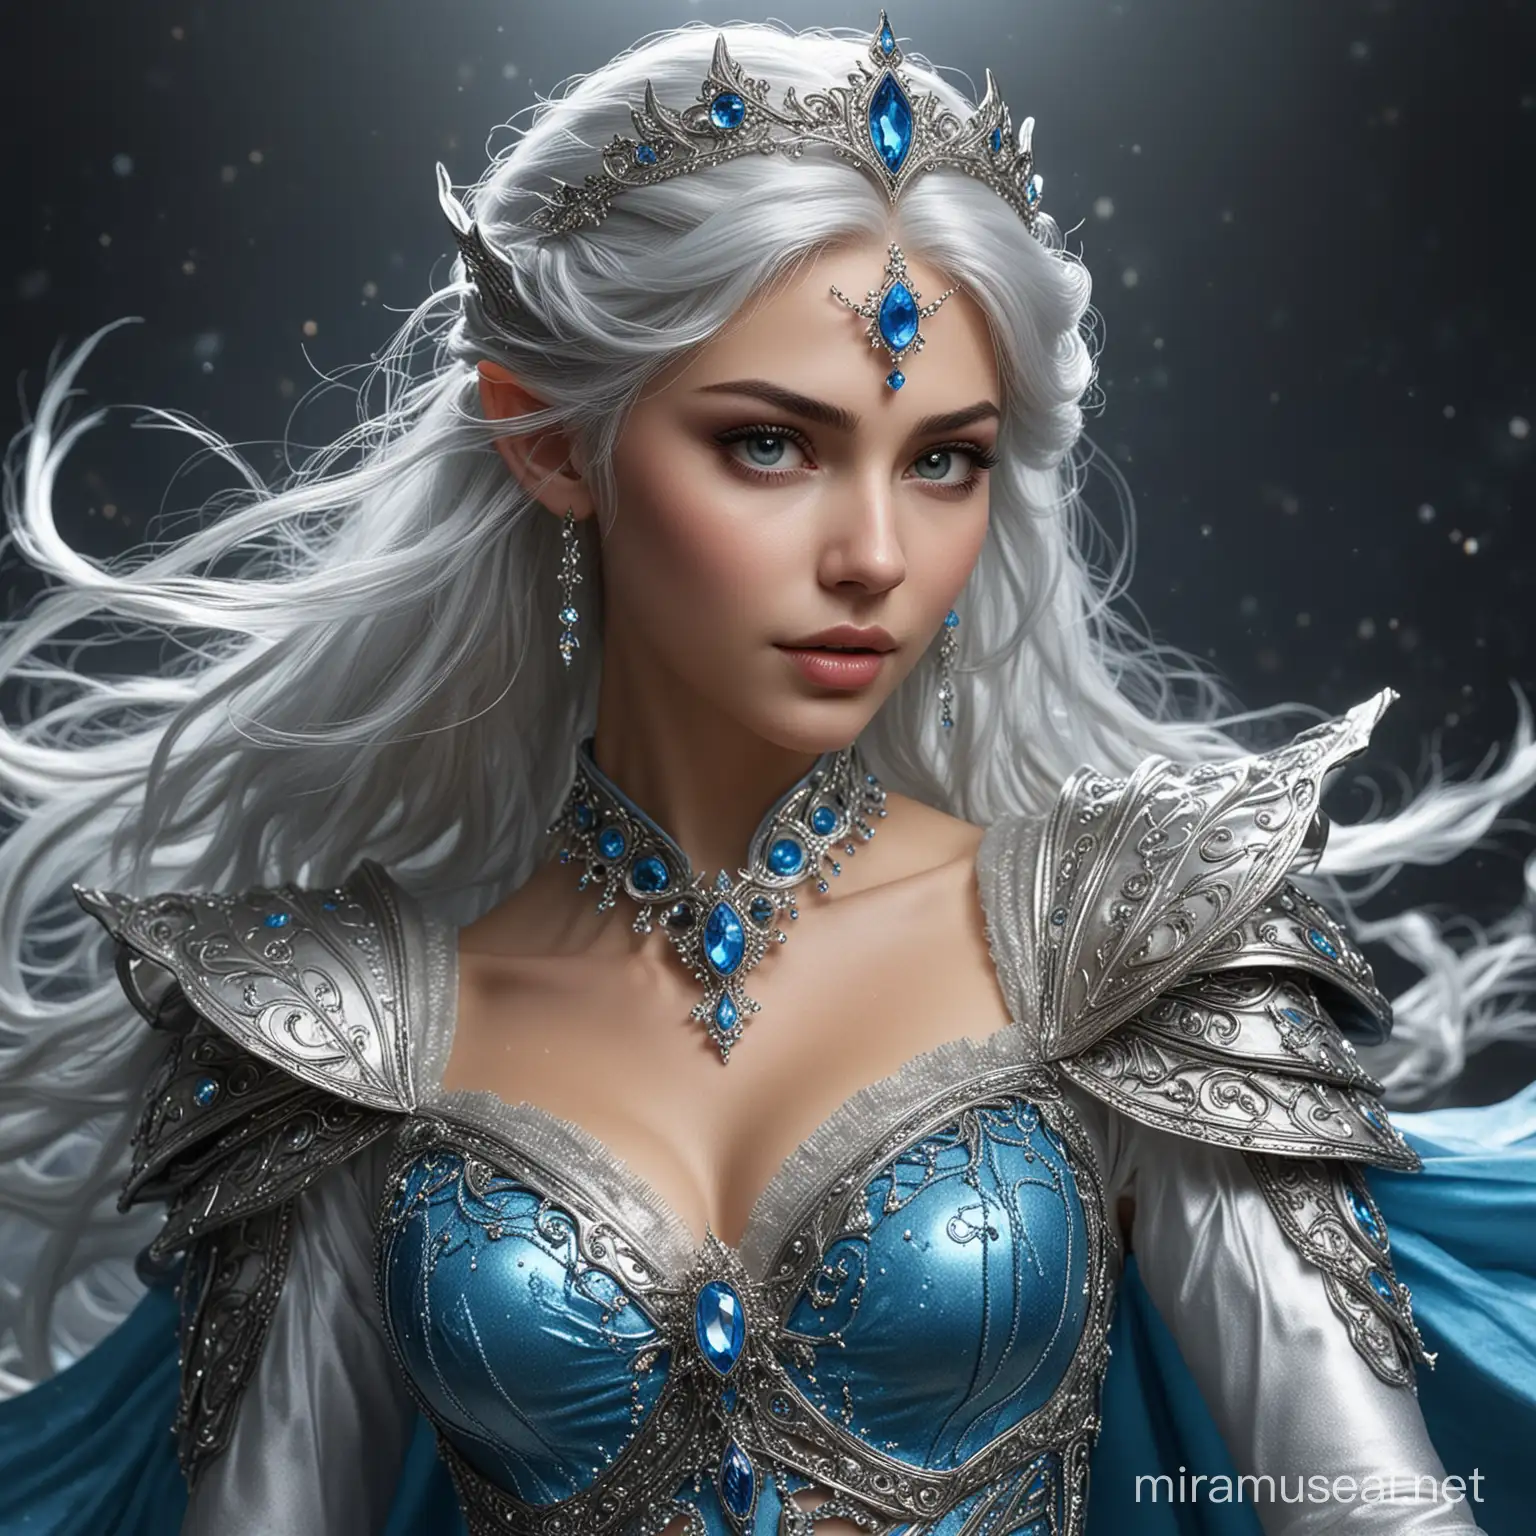 Imagine a half-elf with a regal bearing and features that blend the elegance of her elven heritage with the vibrancy of her human ancestry. Her eyes are a piercing shade of electric blue, sparkling with inner magic and a hint of mischief. Cascading waves of silver hair frame her face, swirling like a storm of lightning frozen in time.

Voltara stands tall and confident, her figure adorned in an array of extravagant costumes that seem to shimmer and sparkle with every movement. Each outfit is a masterpiece of design, crafted from luxurious fabrics and embellished with glittering gems and metallic accents that catch the light and dazzle the eye.

In her hand, she holds a beautifully crafted lute, its surface etched with intricate patterns that seem to glow with an otherworldly light. As she strums the strings, a melody fills the air, rich and melodious, resonating with the power of magic itself.

Surrounded by an aura of charisma and charm, Voltara Crescendo is a vision of grace and beauty, a true star shining brightly in the darkness. With her boundless talent and infectious energy, she captivates all who behold her, leaving an indelible mark on their hearts and souls.





